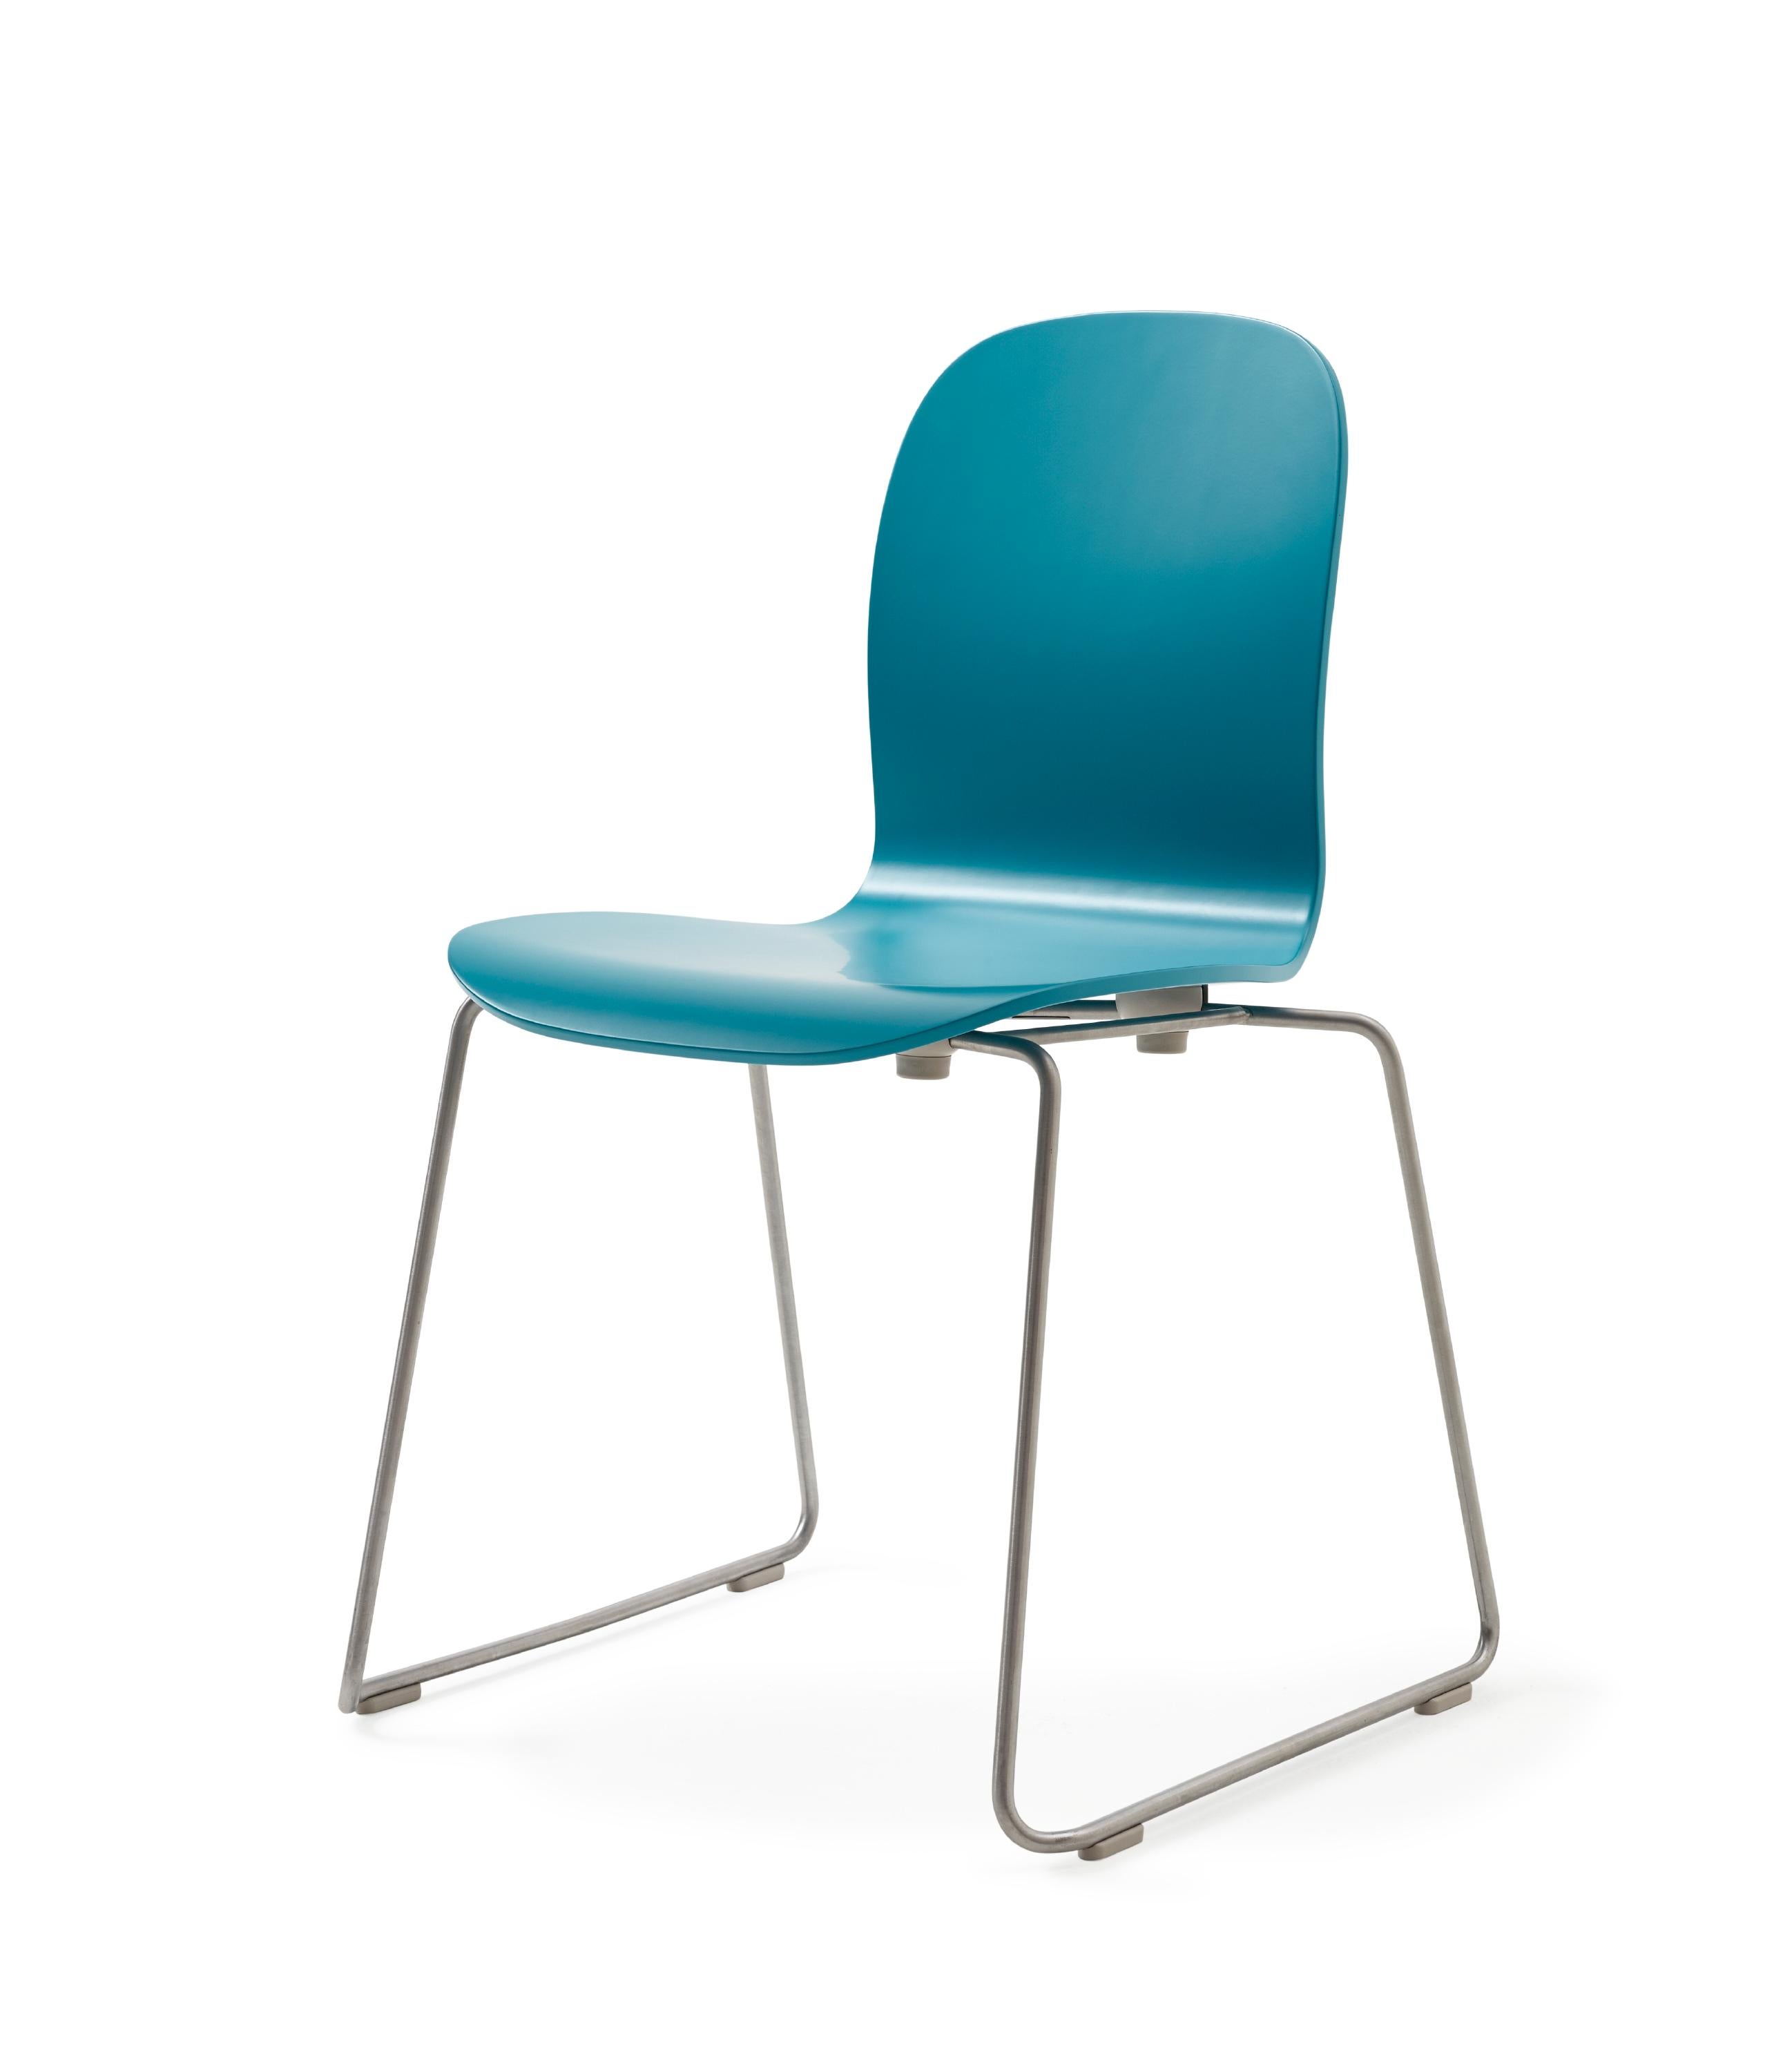 Blue (77_PETROL BLUE) Jasper Morrison Tate Chair in Beech Plywood with Matte Lacquer for Cappellini 2